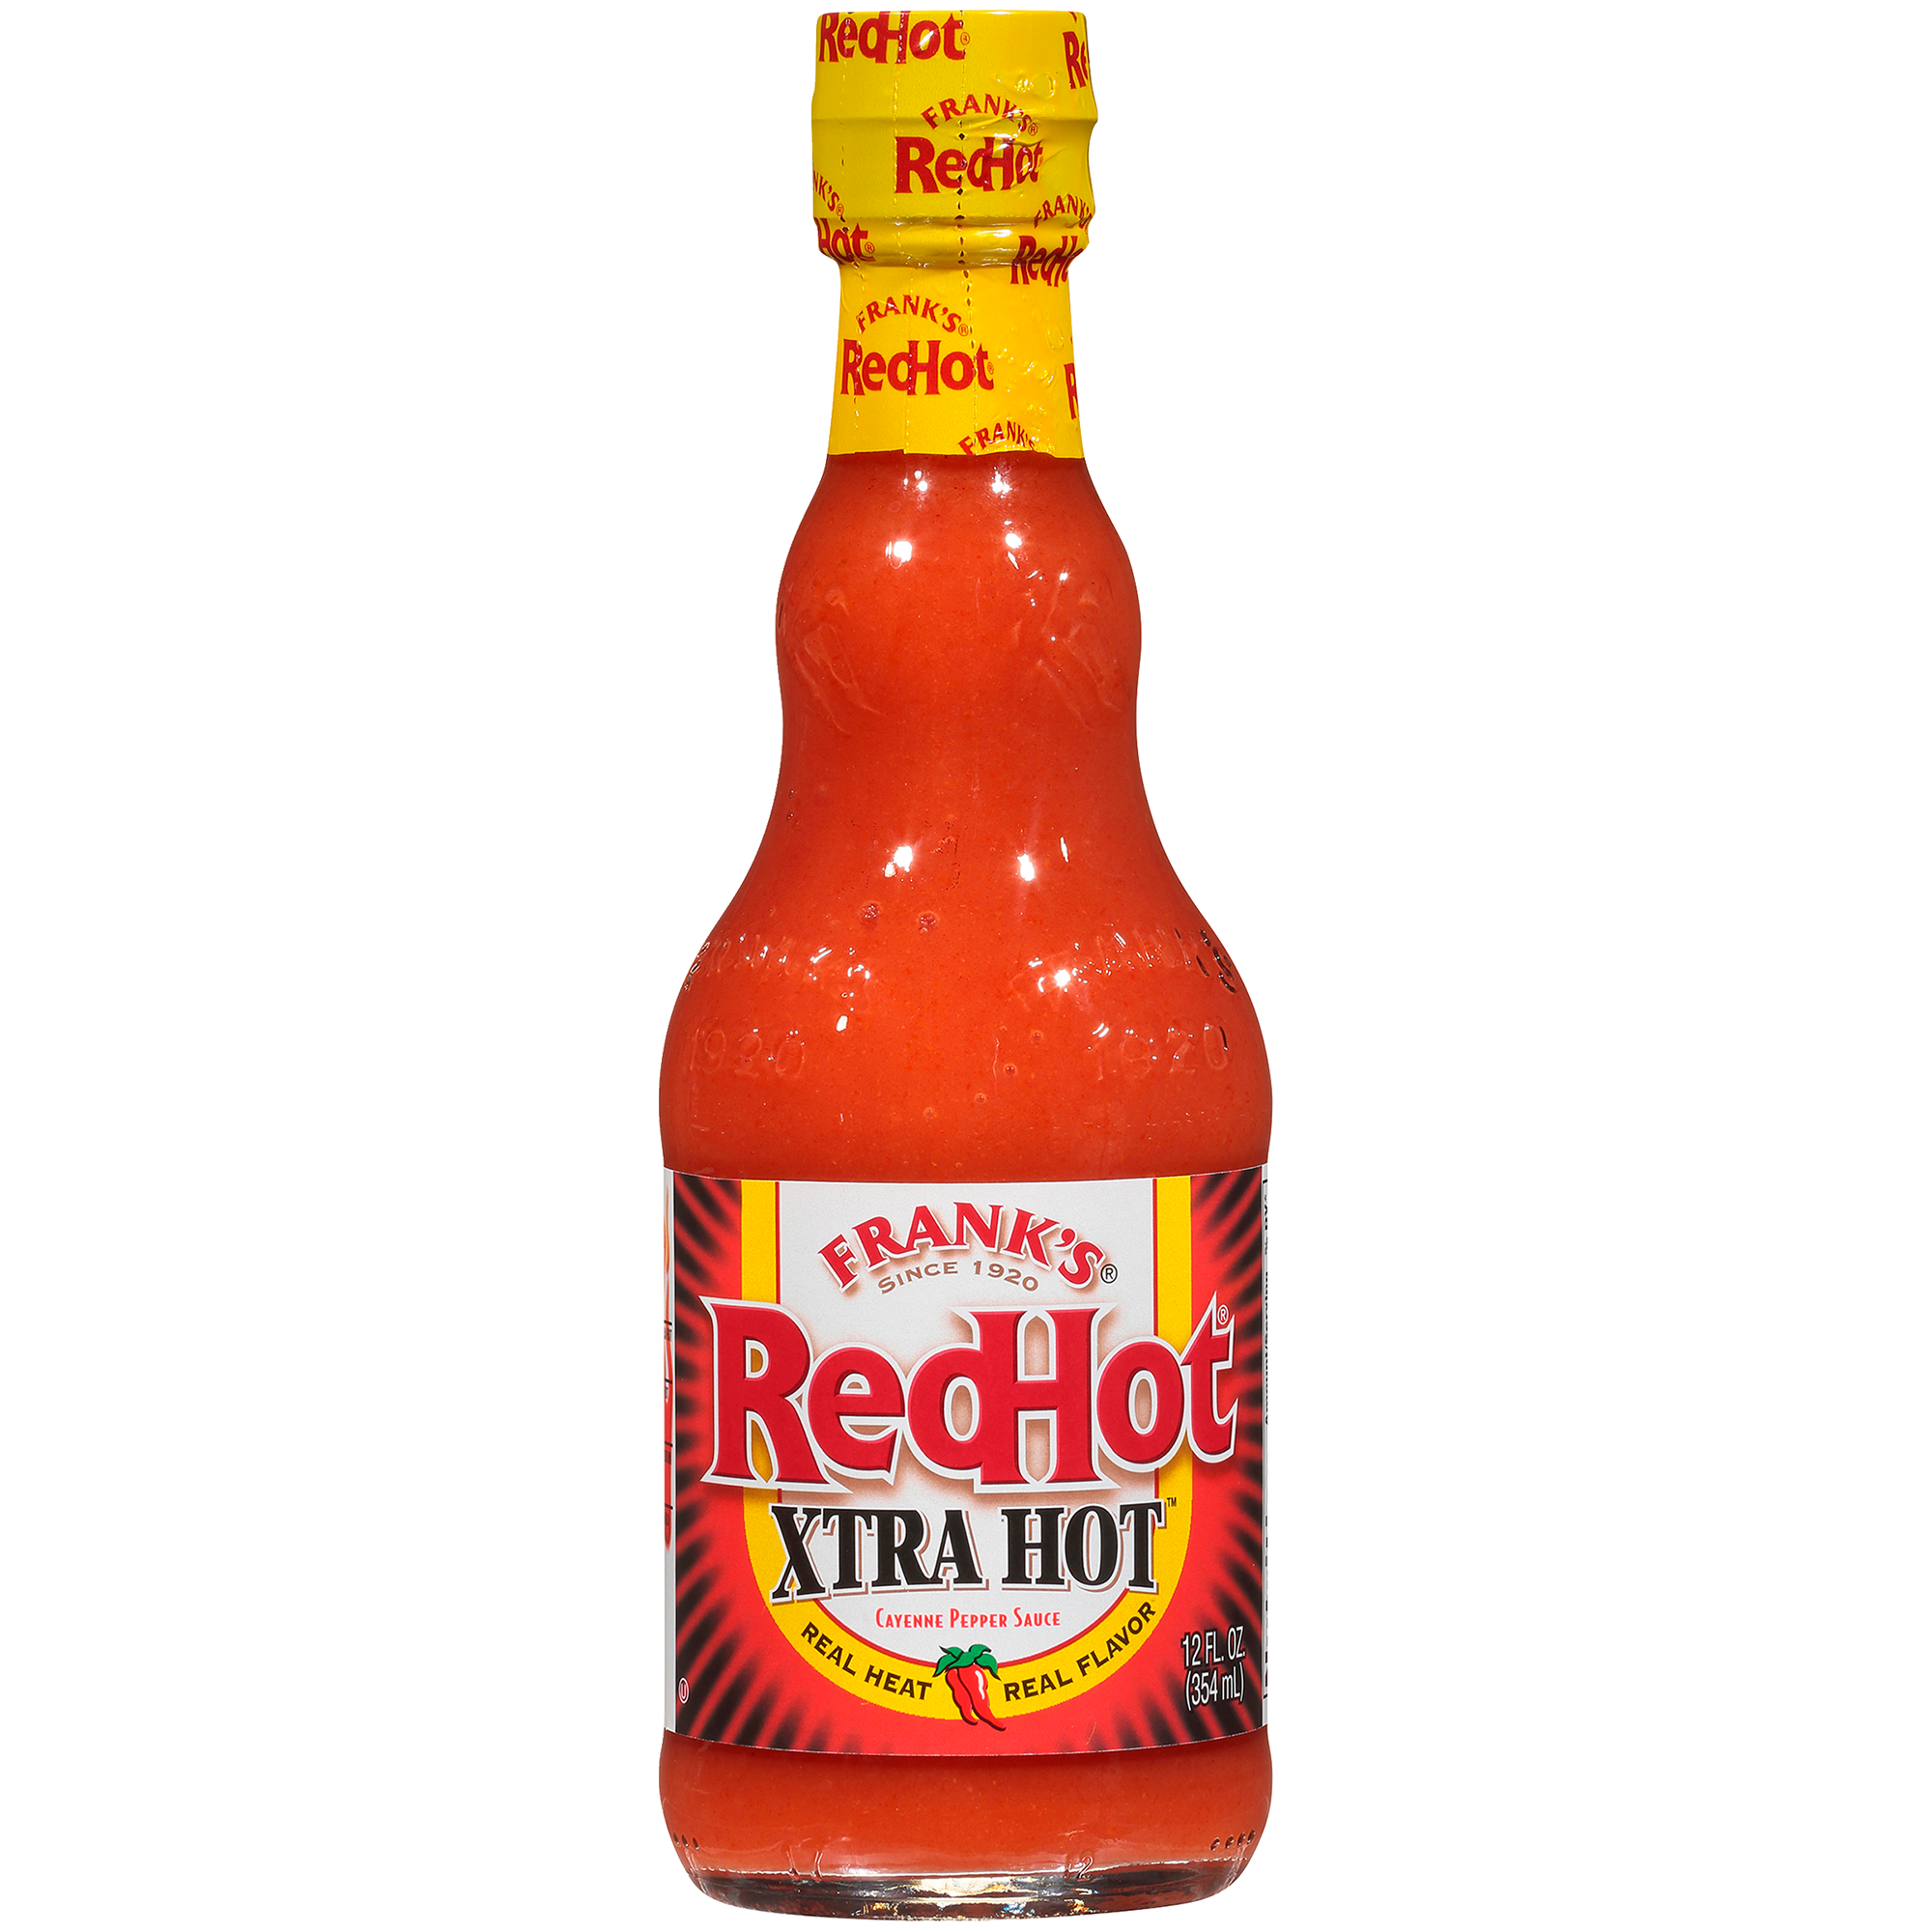 SALSA EXTRA PICANTE FRANK_S REDHOT_12oz.png